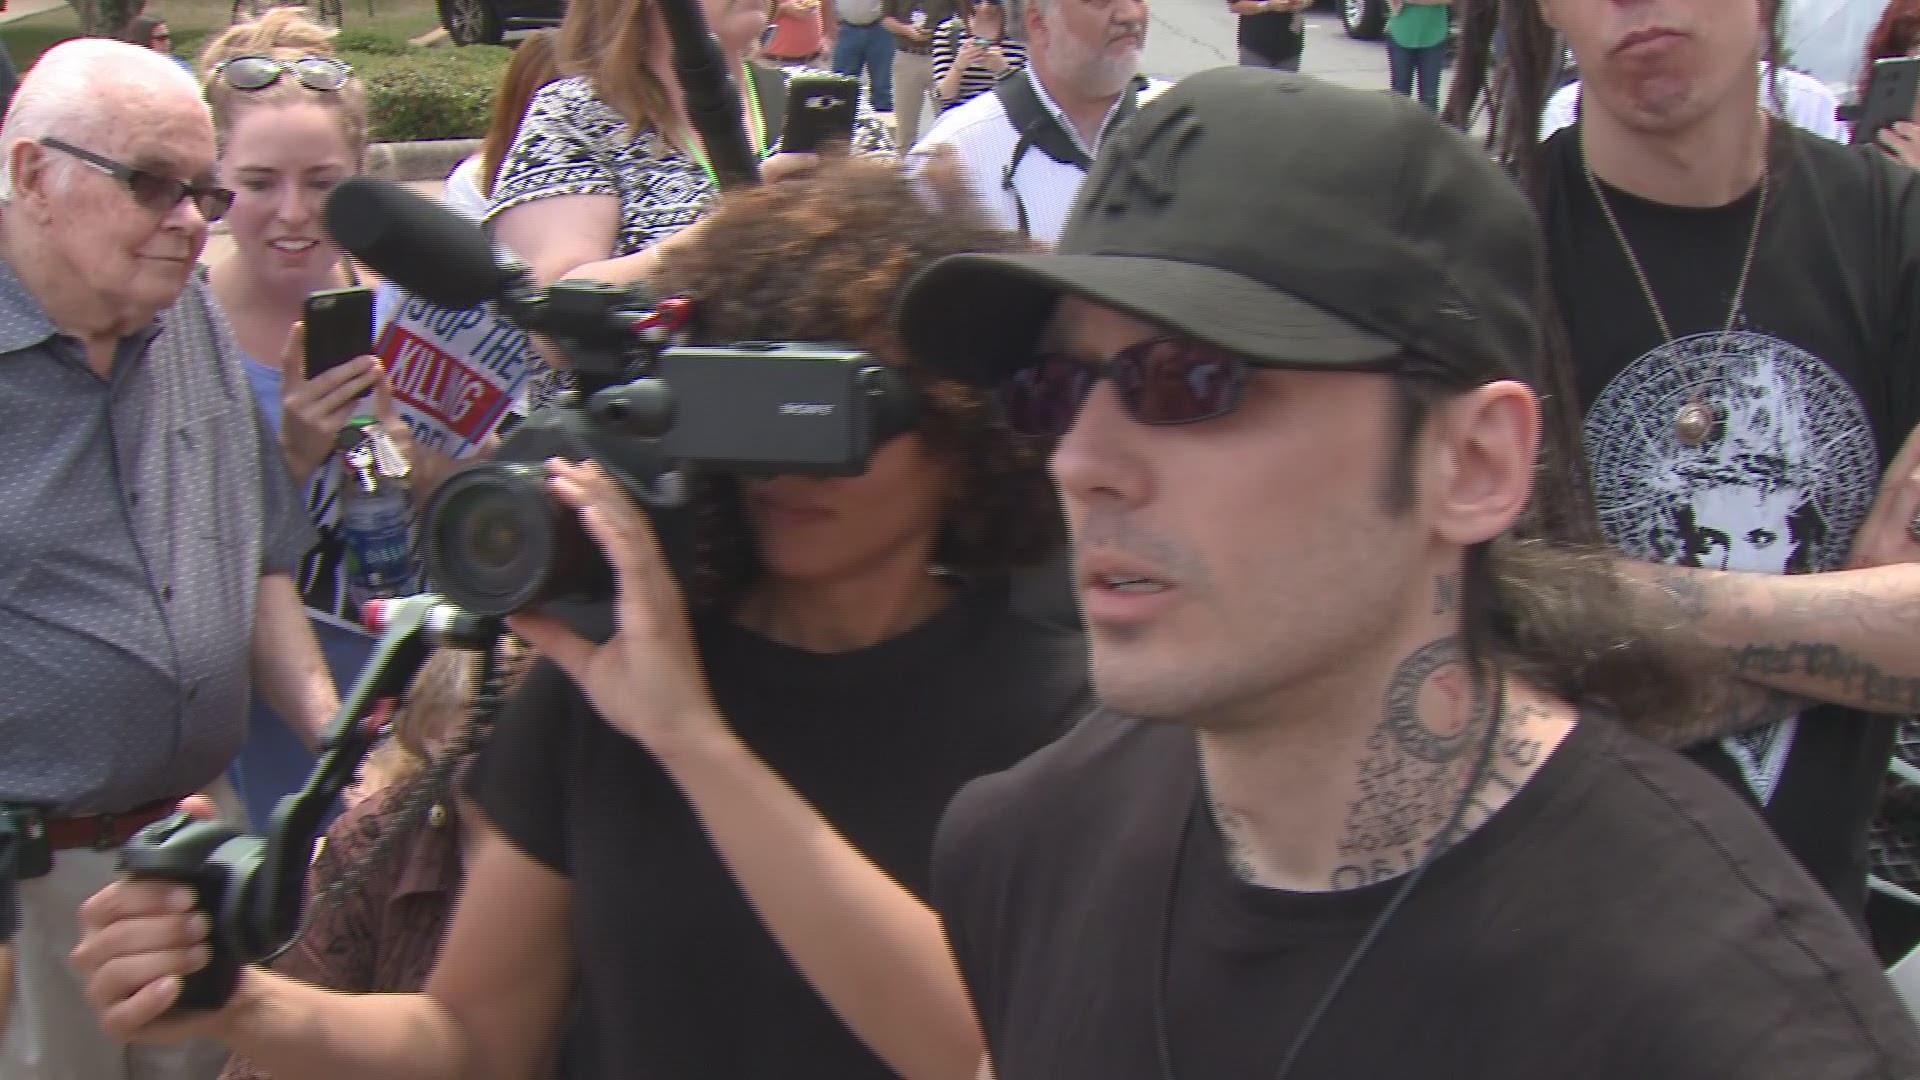 Damien Echols returns to Arkansas to protest the execution of 7 men in 10 days